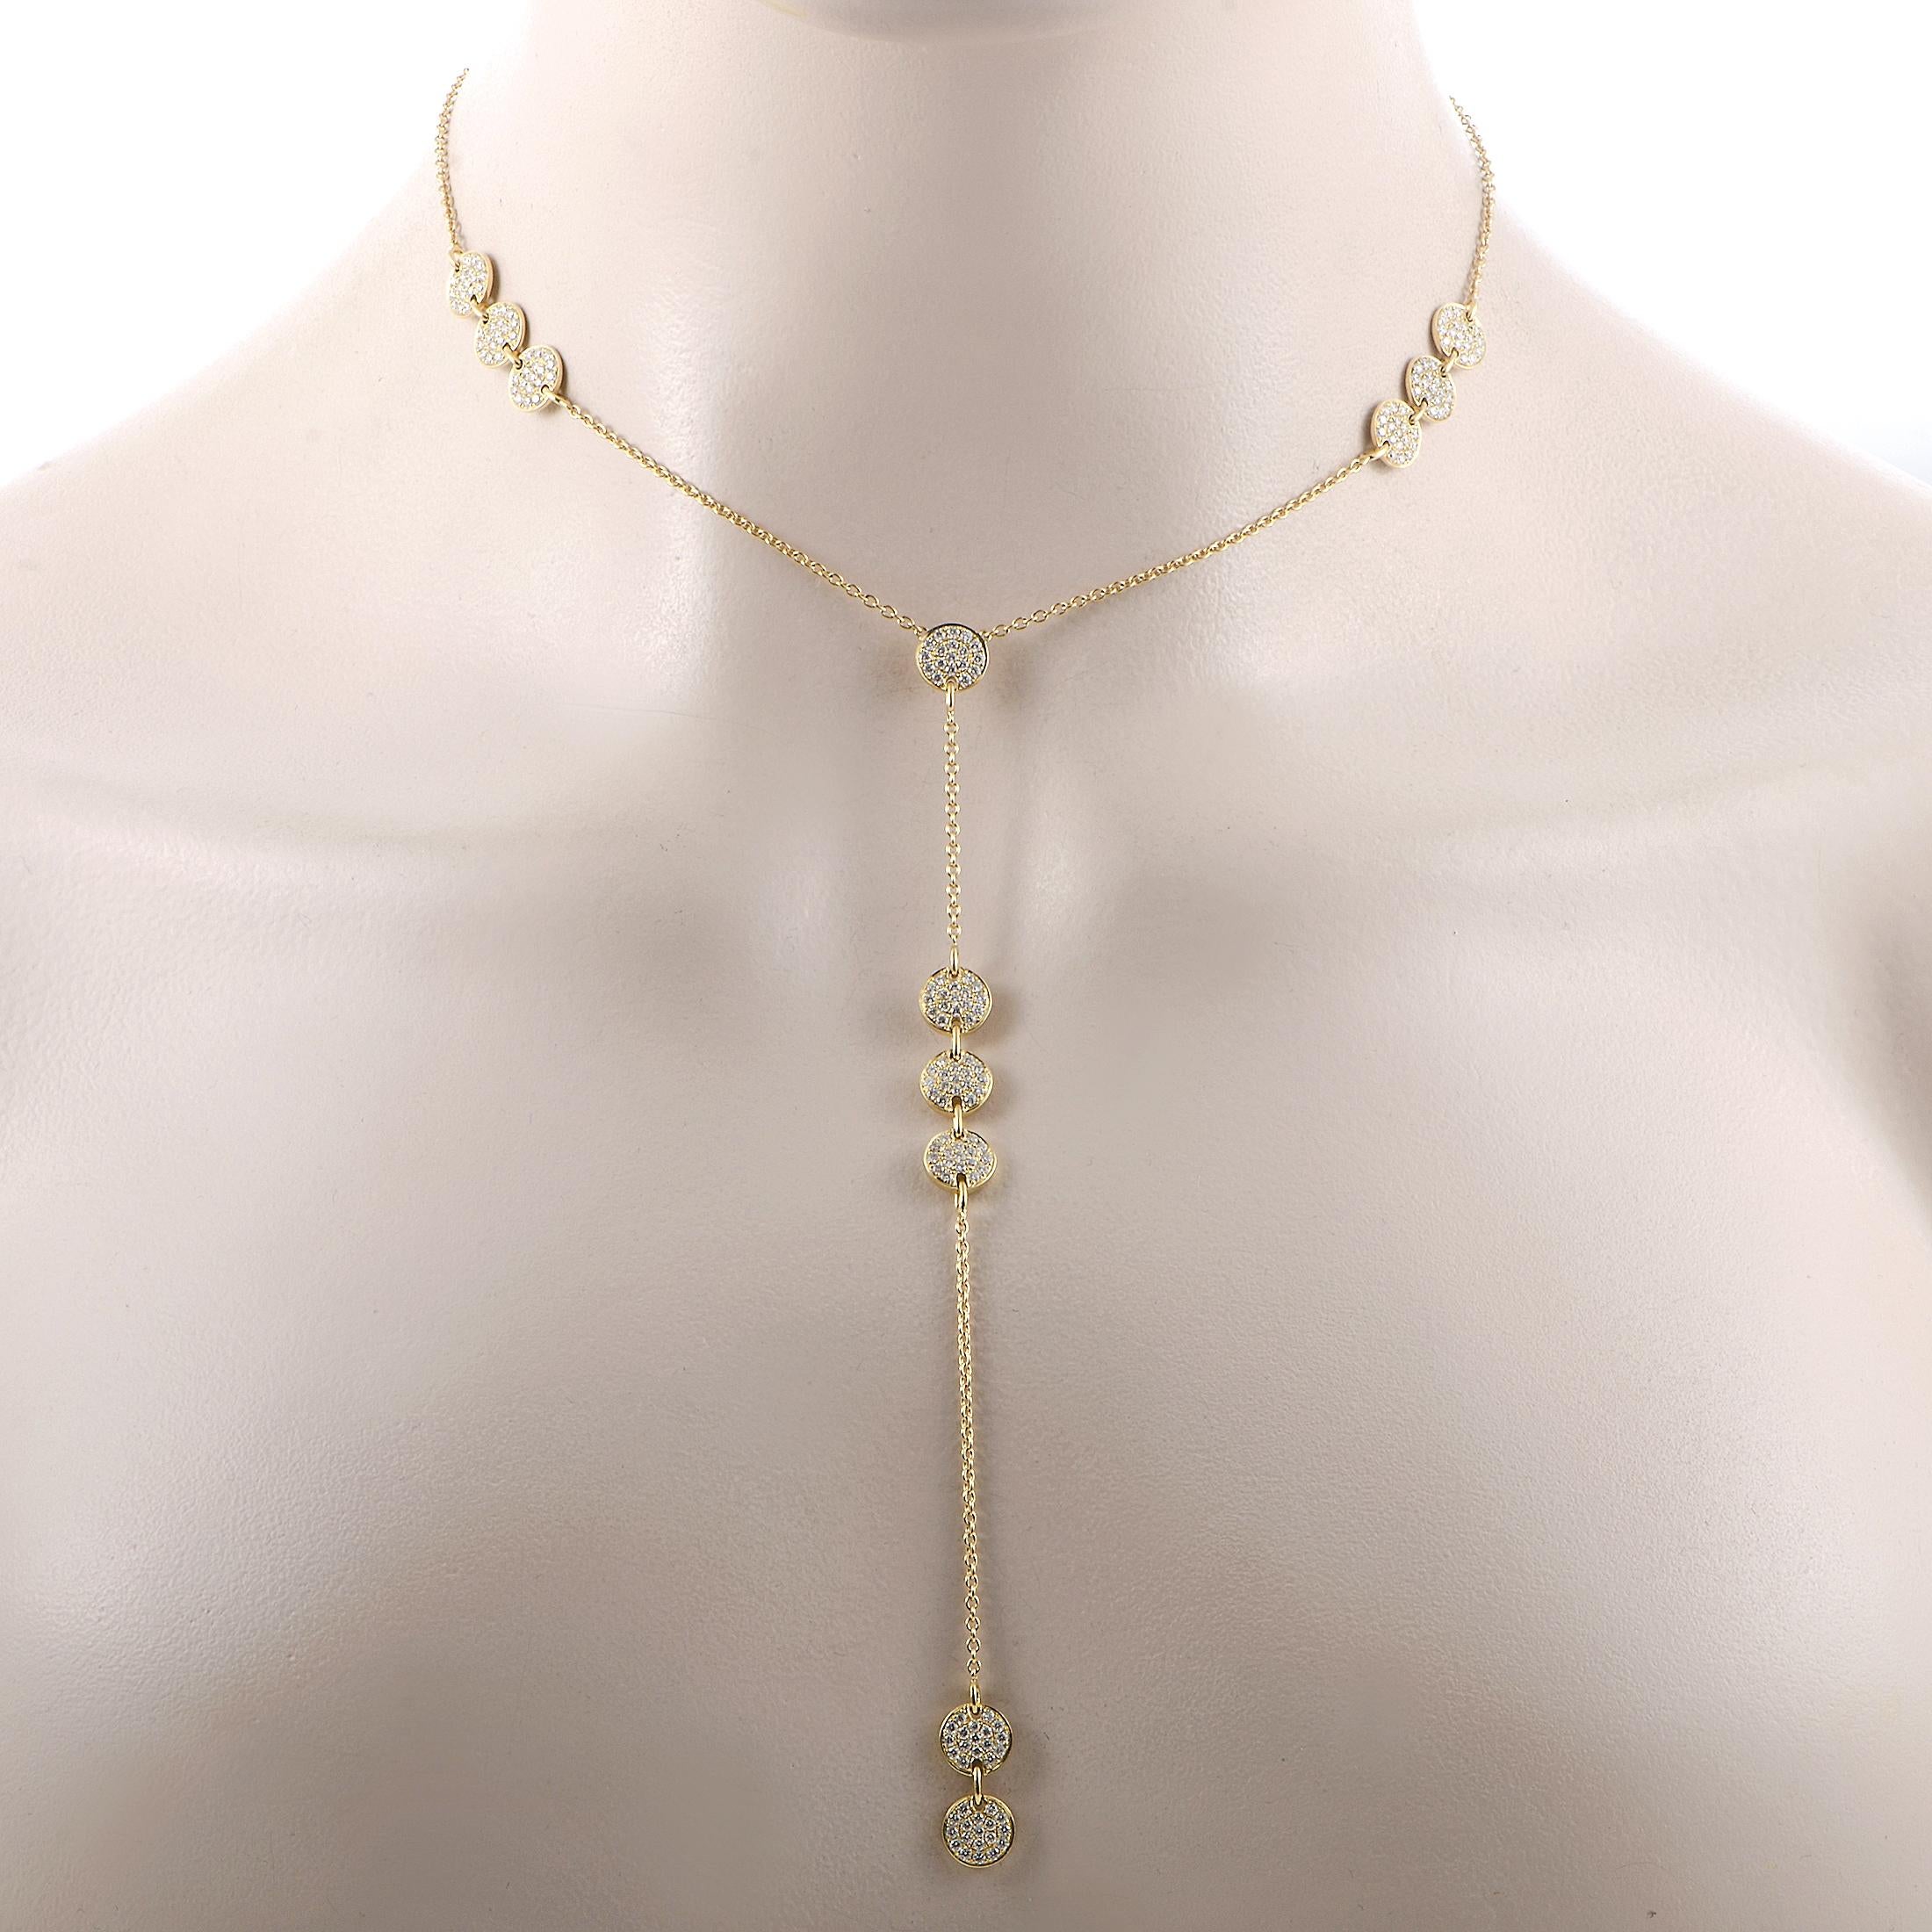 This LB Exclusive necklace is made out of 18K yellow gold and diamonds that total 2.90 carats. The necklace weighs 13.8 grams, measures 18” in length, and boasts a pendant that measures 5.25” in length and 0.25” in width.

Offered in brand new